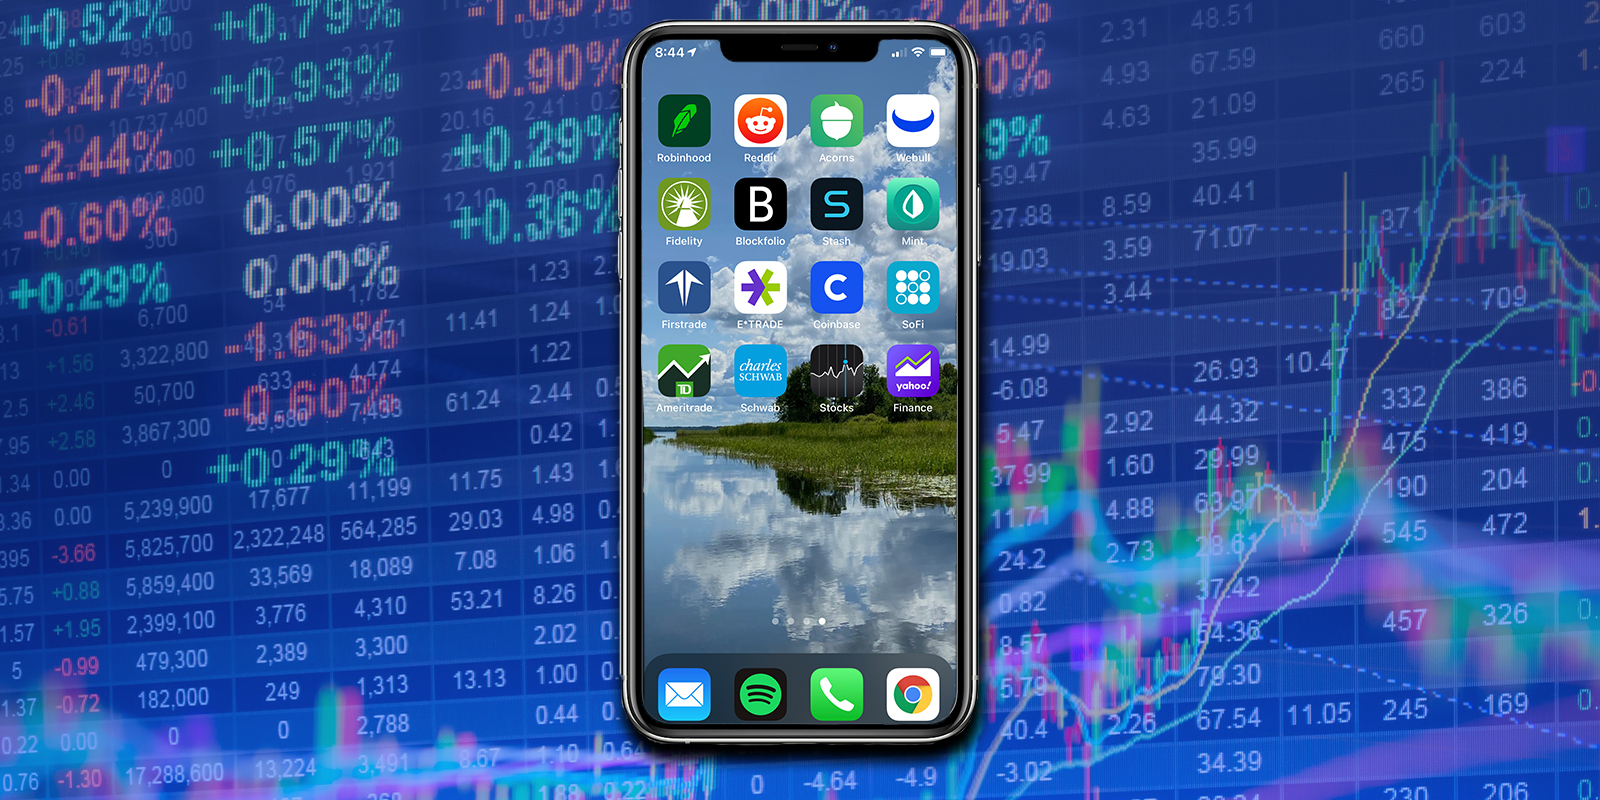 5 best stock trading apps for iPhone - 9to5Mac